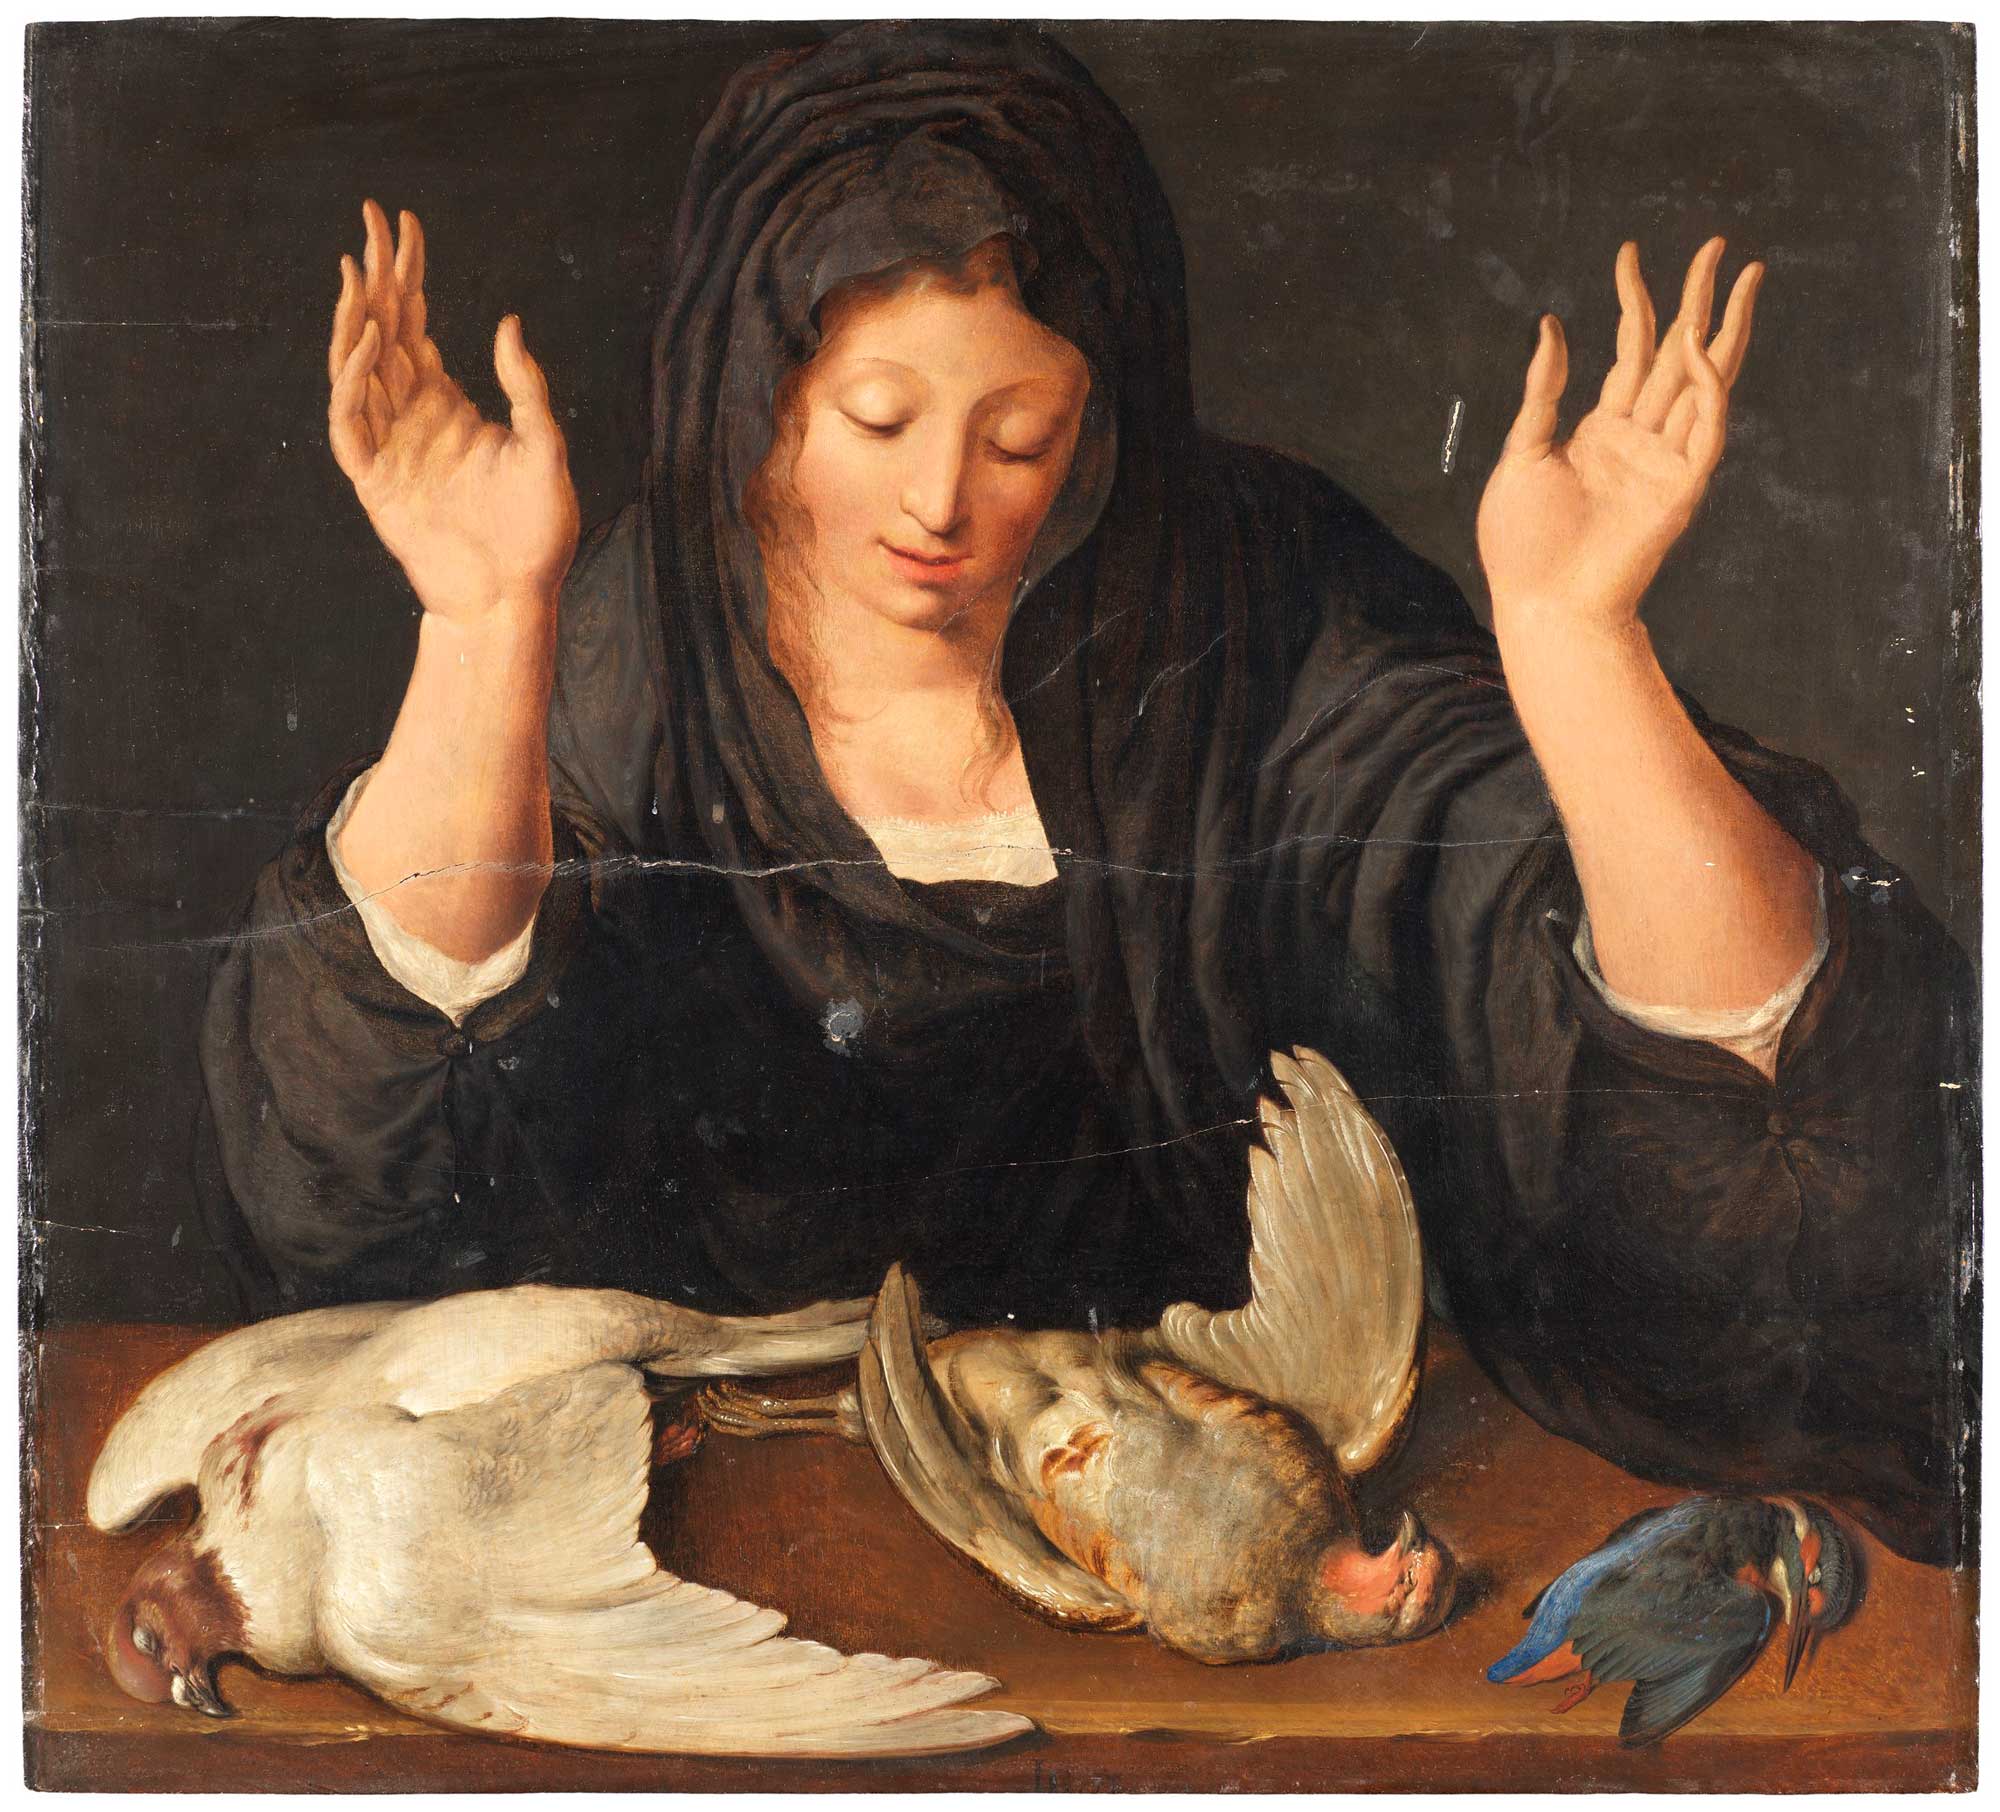 A painting of a young woman mourning a dead dove, a partridge, and a kingfisher by Dutch artist Jacob de Gheyn II, ca. 1620. The painting shows a woman sitting at a table with her hands raised, with the dead birds arrayed in front of her.